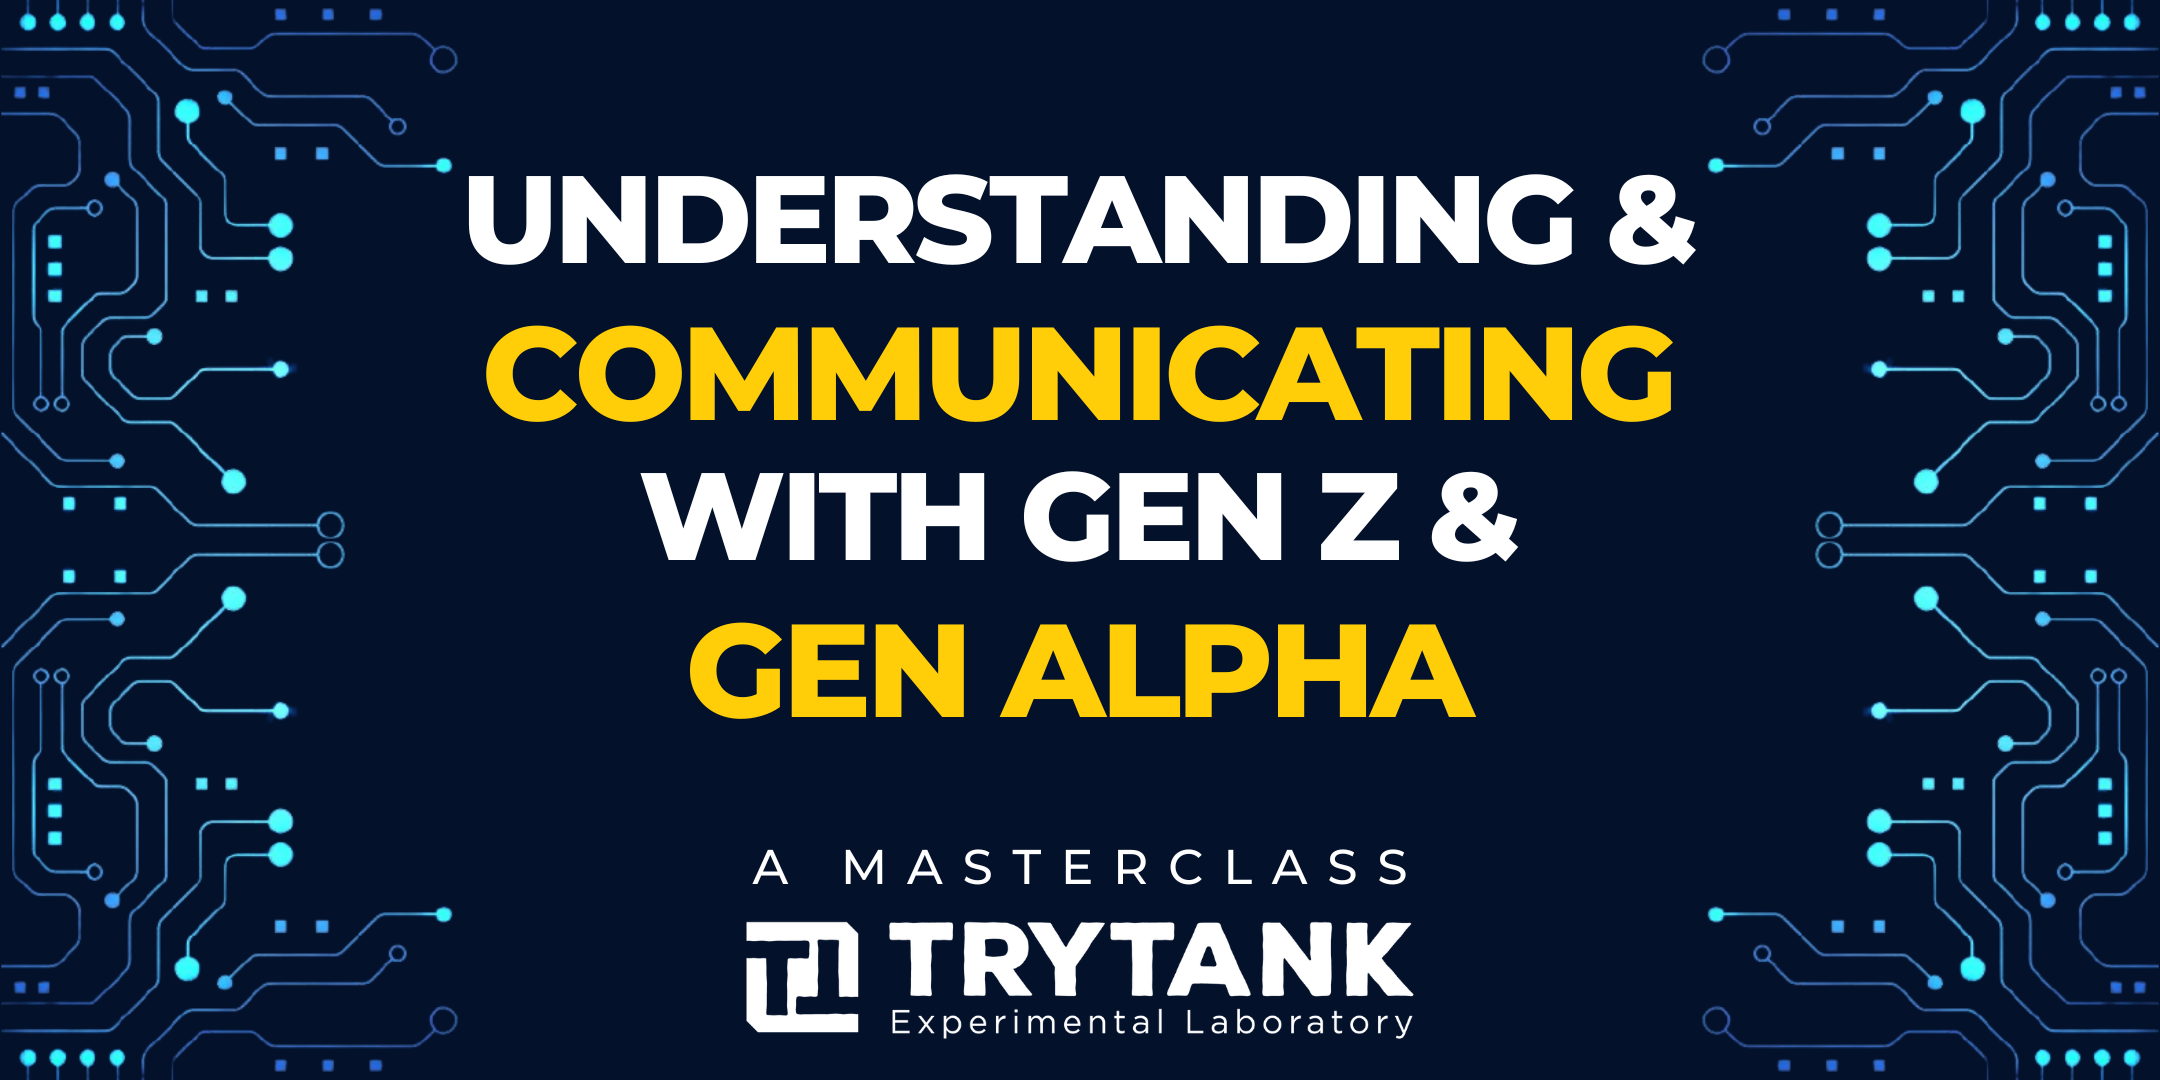 Understanding and communicating with Gen Z and Gen Alpha